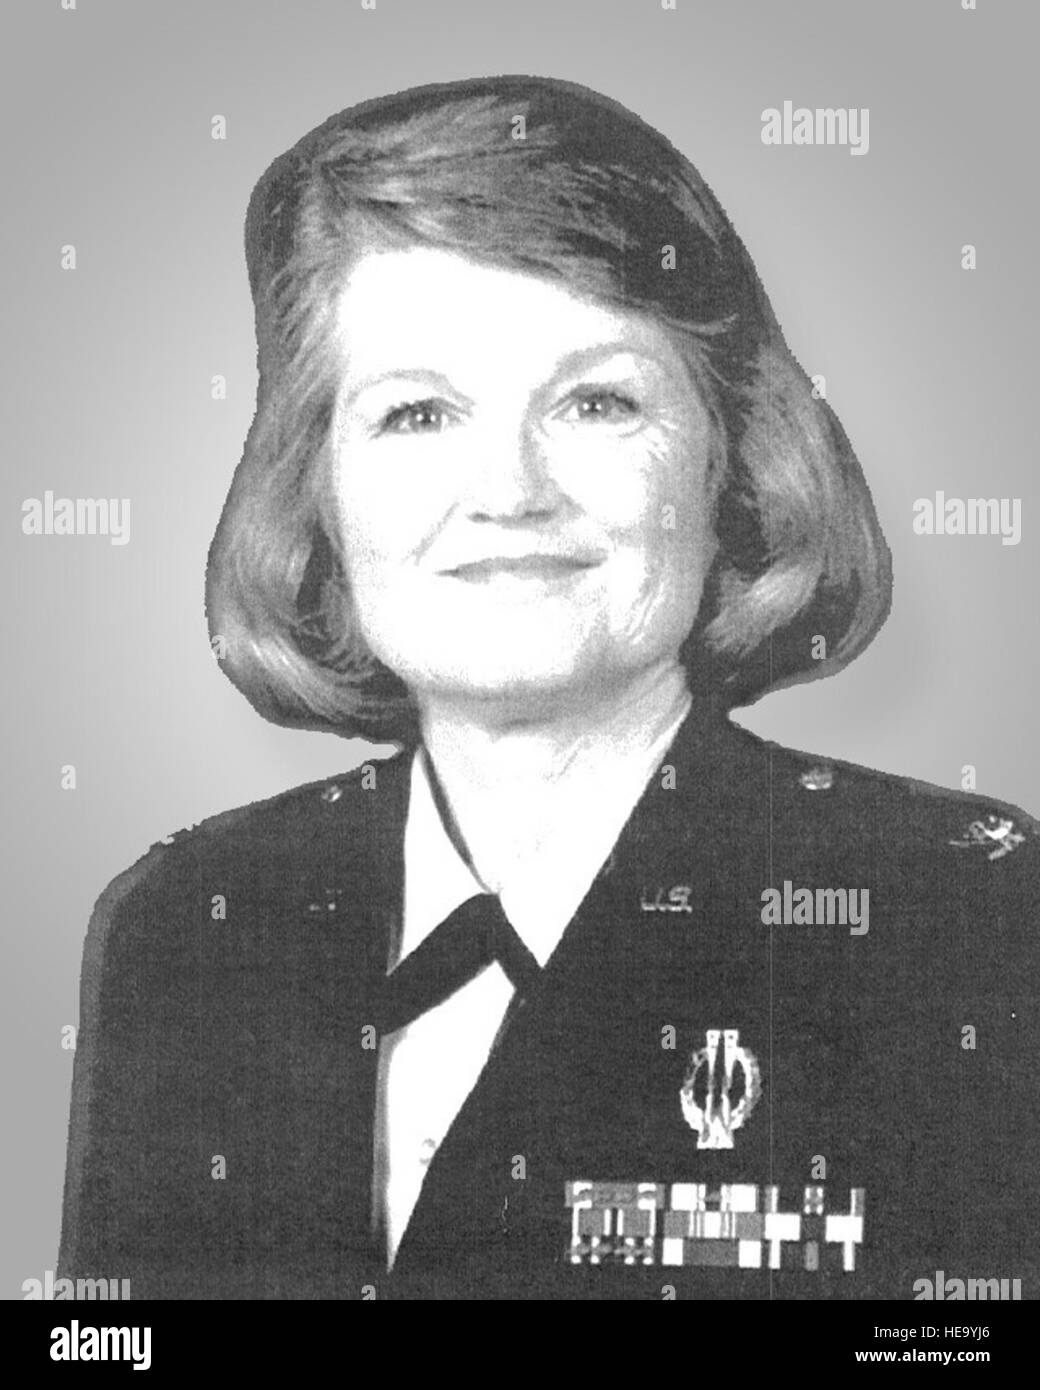 Col. Margie Humphrey, former Air Reserve Personnel Center commander, was Headquarters ARPC’s first female commander located at the former Lowry Air Force Base, Colorado. She served as the 24th ARPC commander from Nov. 5, 1997 – June 15, 2000. Stock Photo